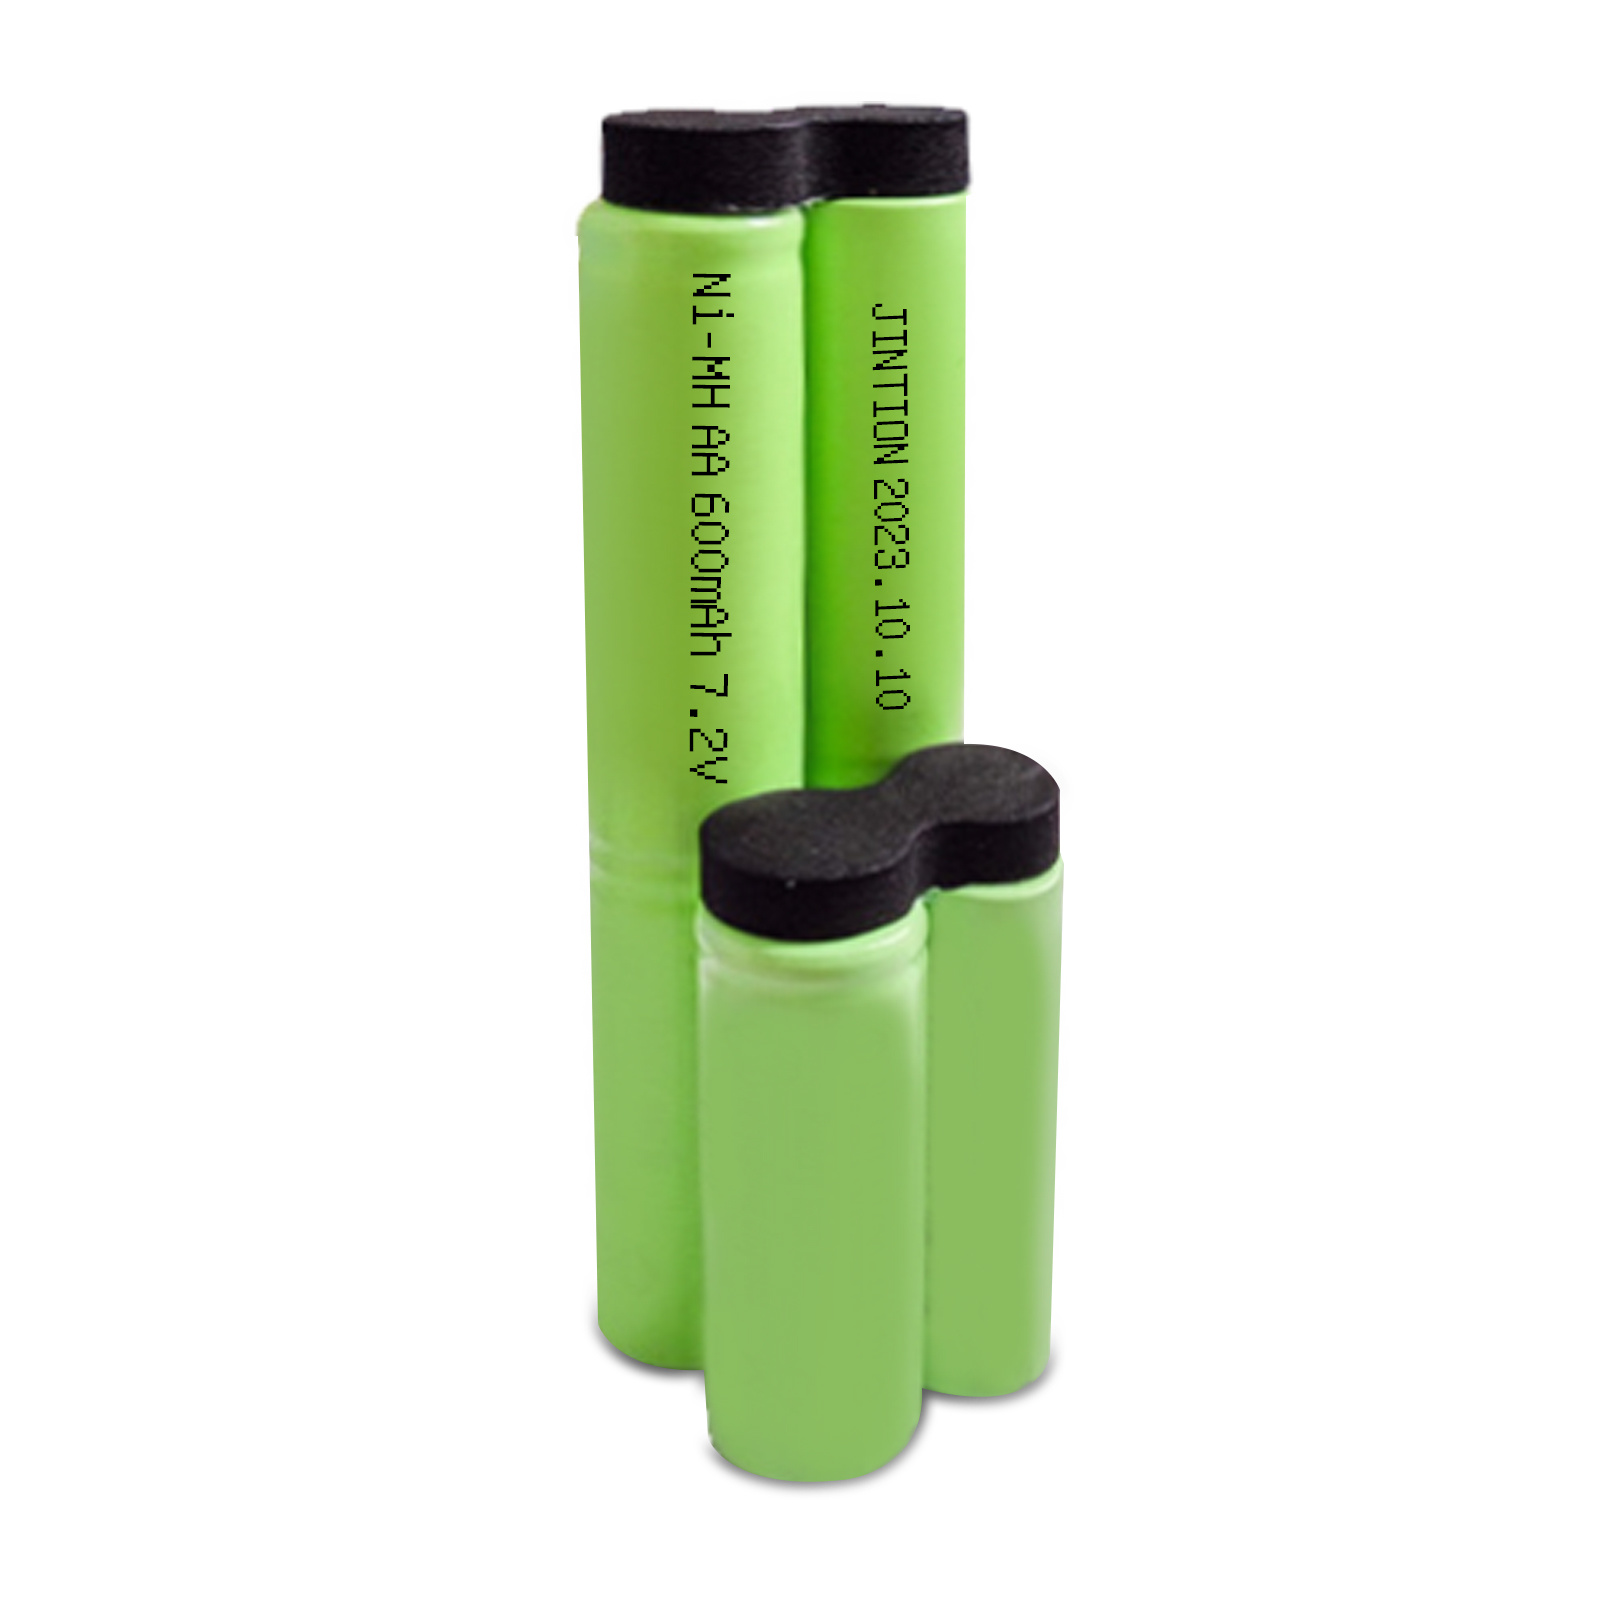 nimh AA 600mAh 7.2v Fast charge batteriesrechargeable ni-mh battery size cell FOR Vacuum cleaner